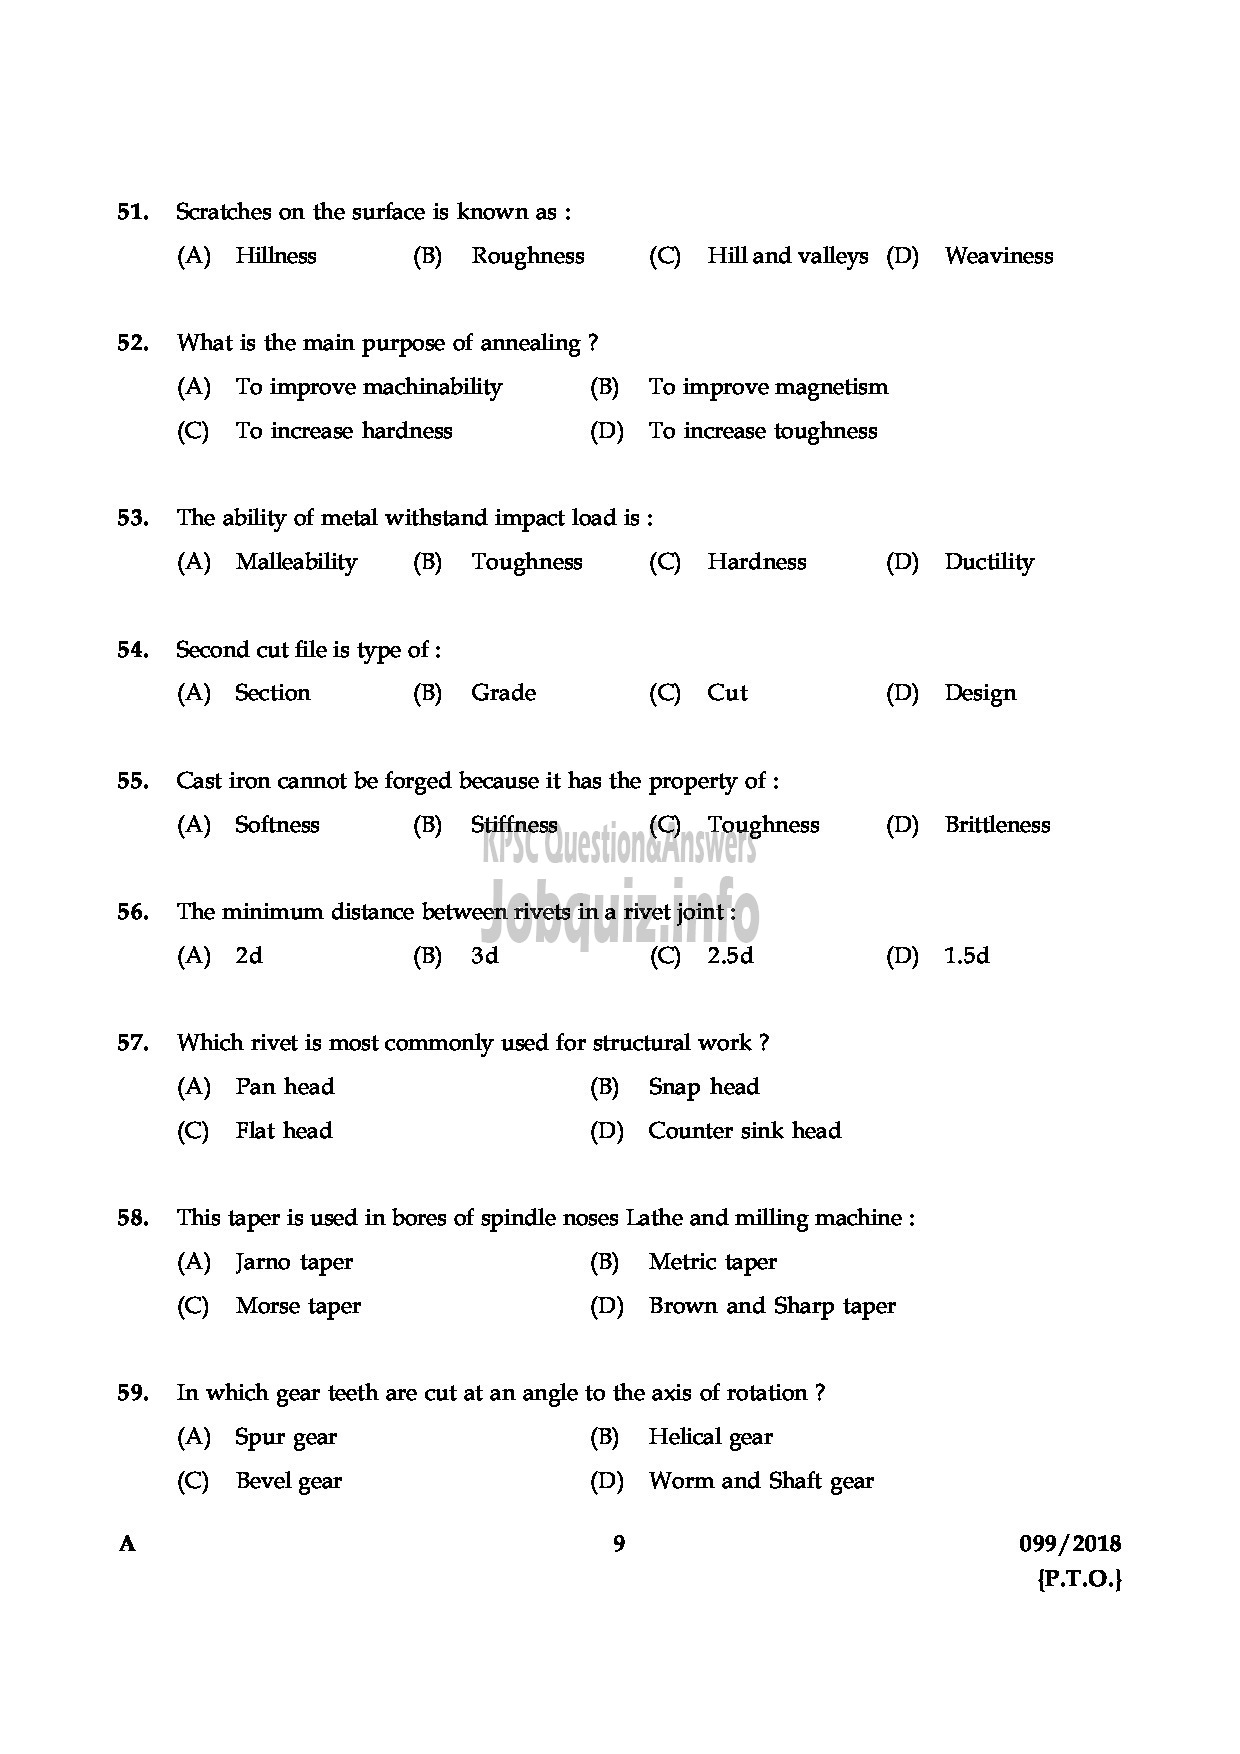 Kerala PSC Question Paper - JUNIOR INSTRUCTOR FITTER INDUSTRIAL TRAINING ENGLISH -9